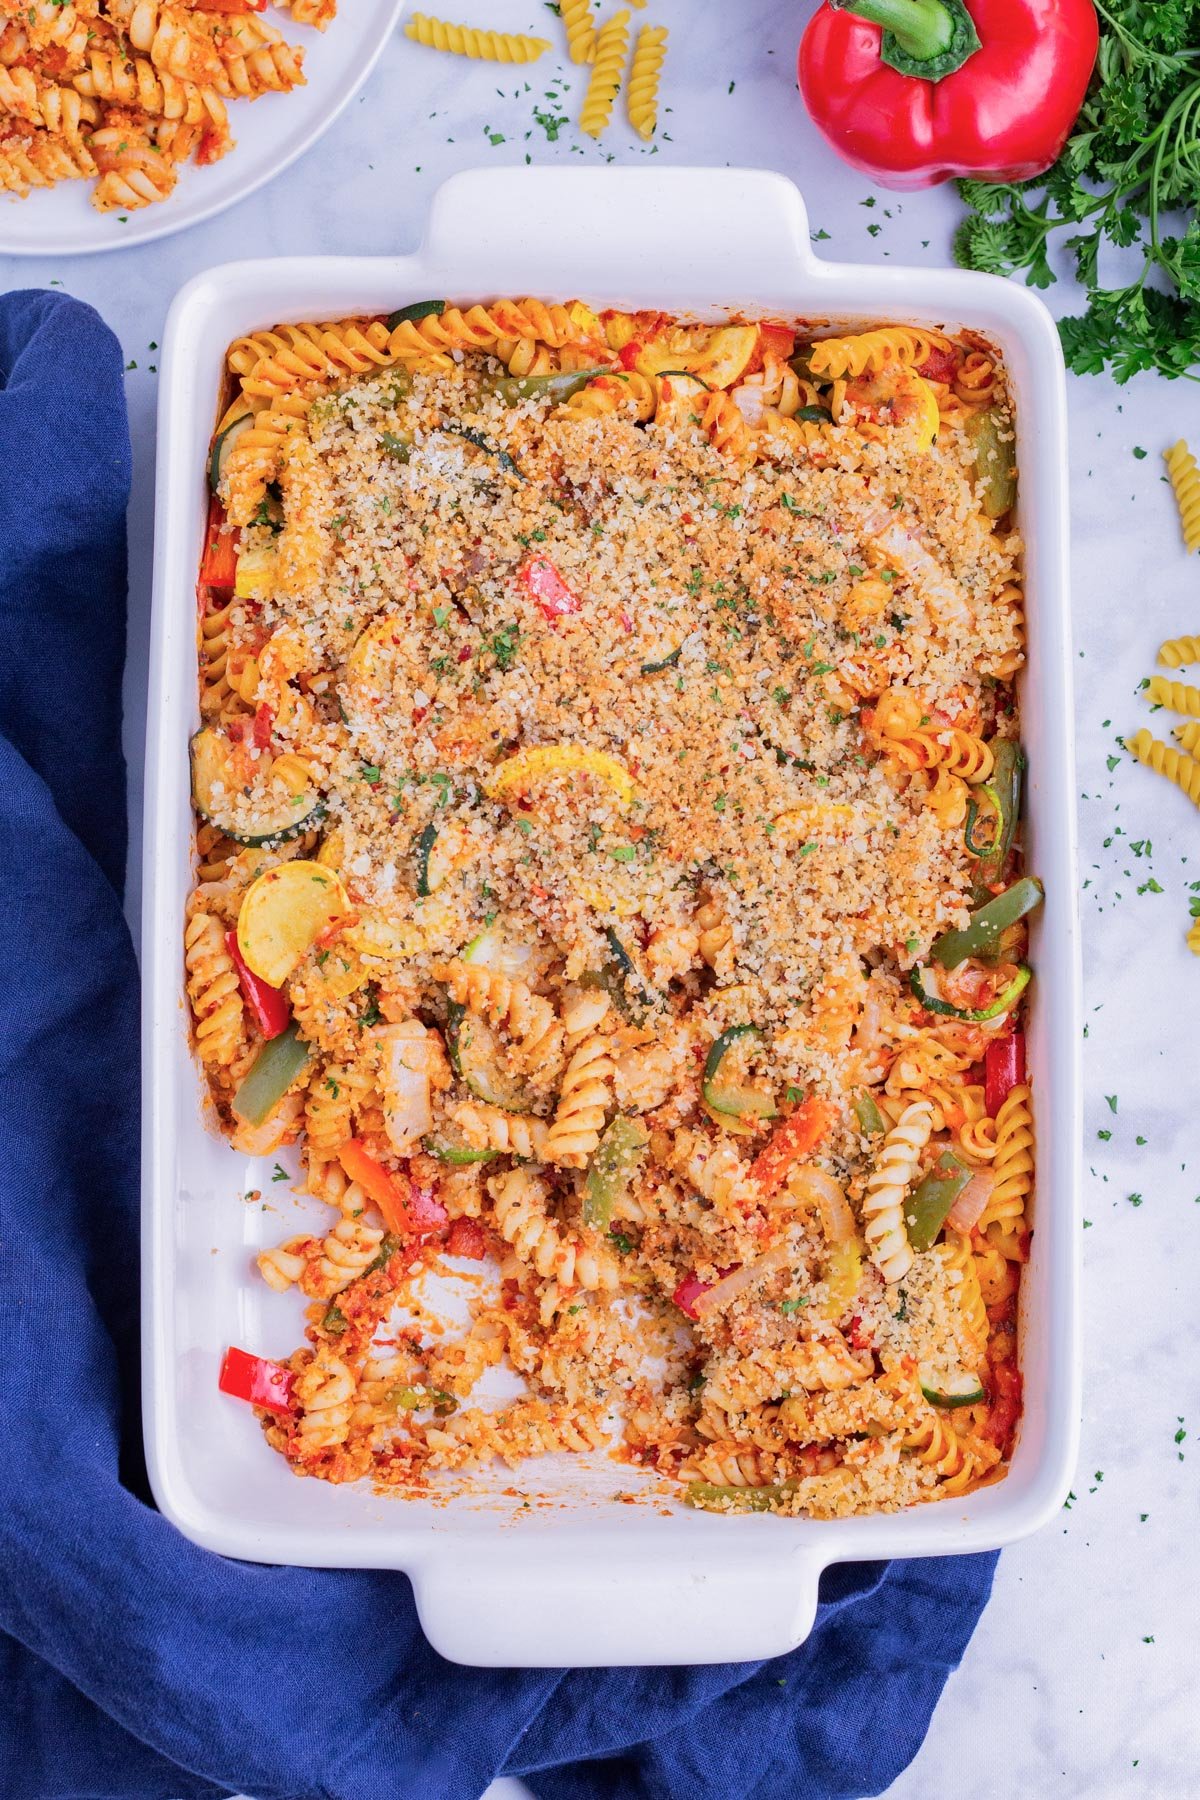 Pasta is mixed with roasted veggies, cheese, and sauce and baked in the oven.